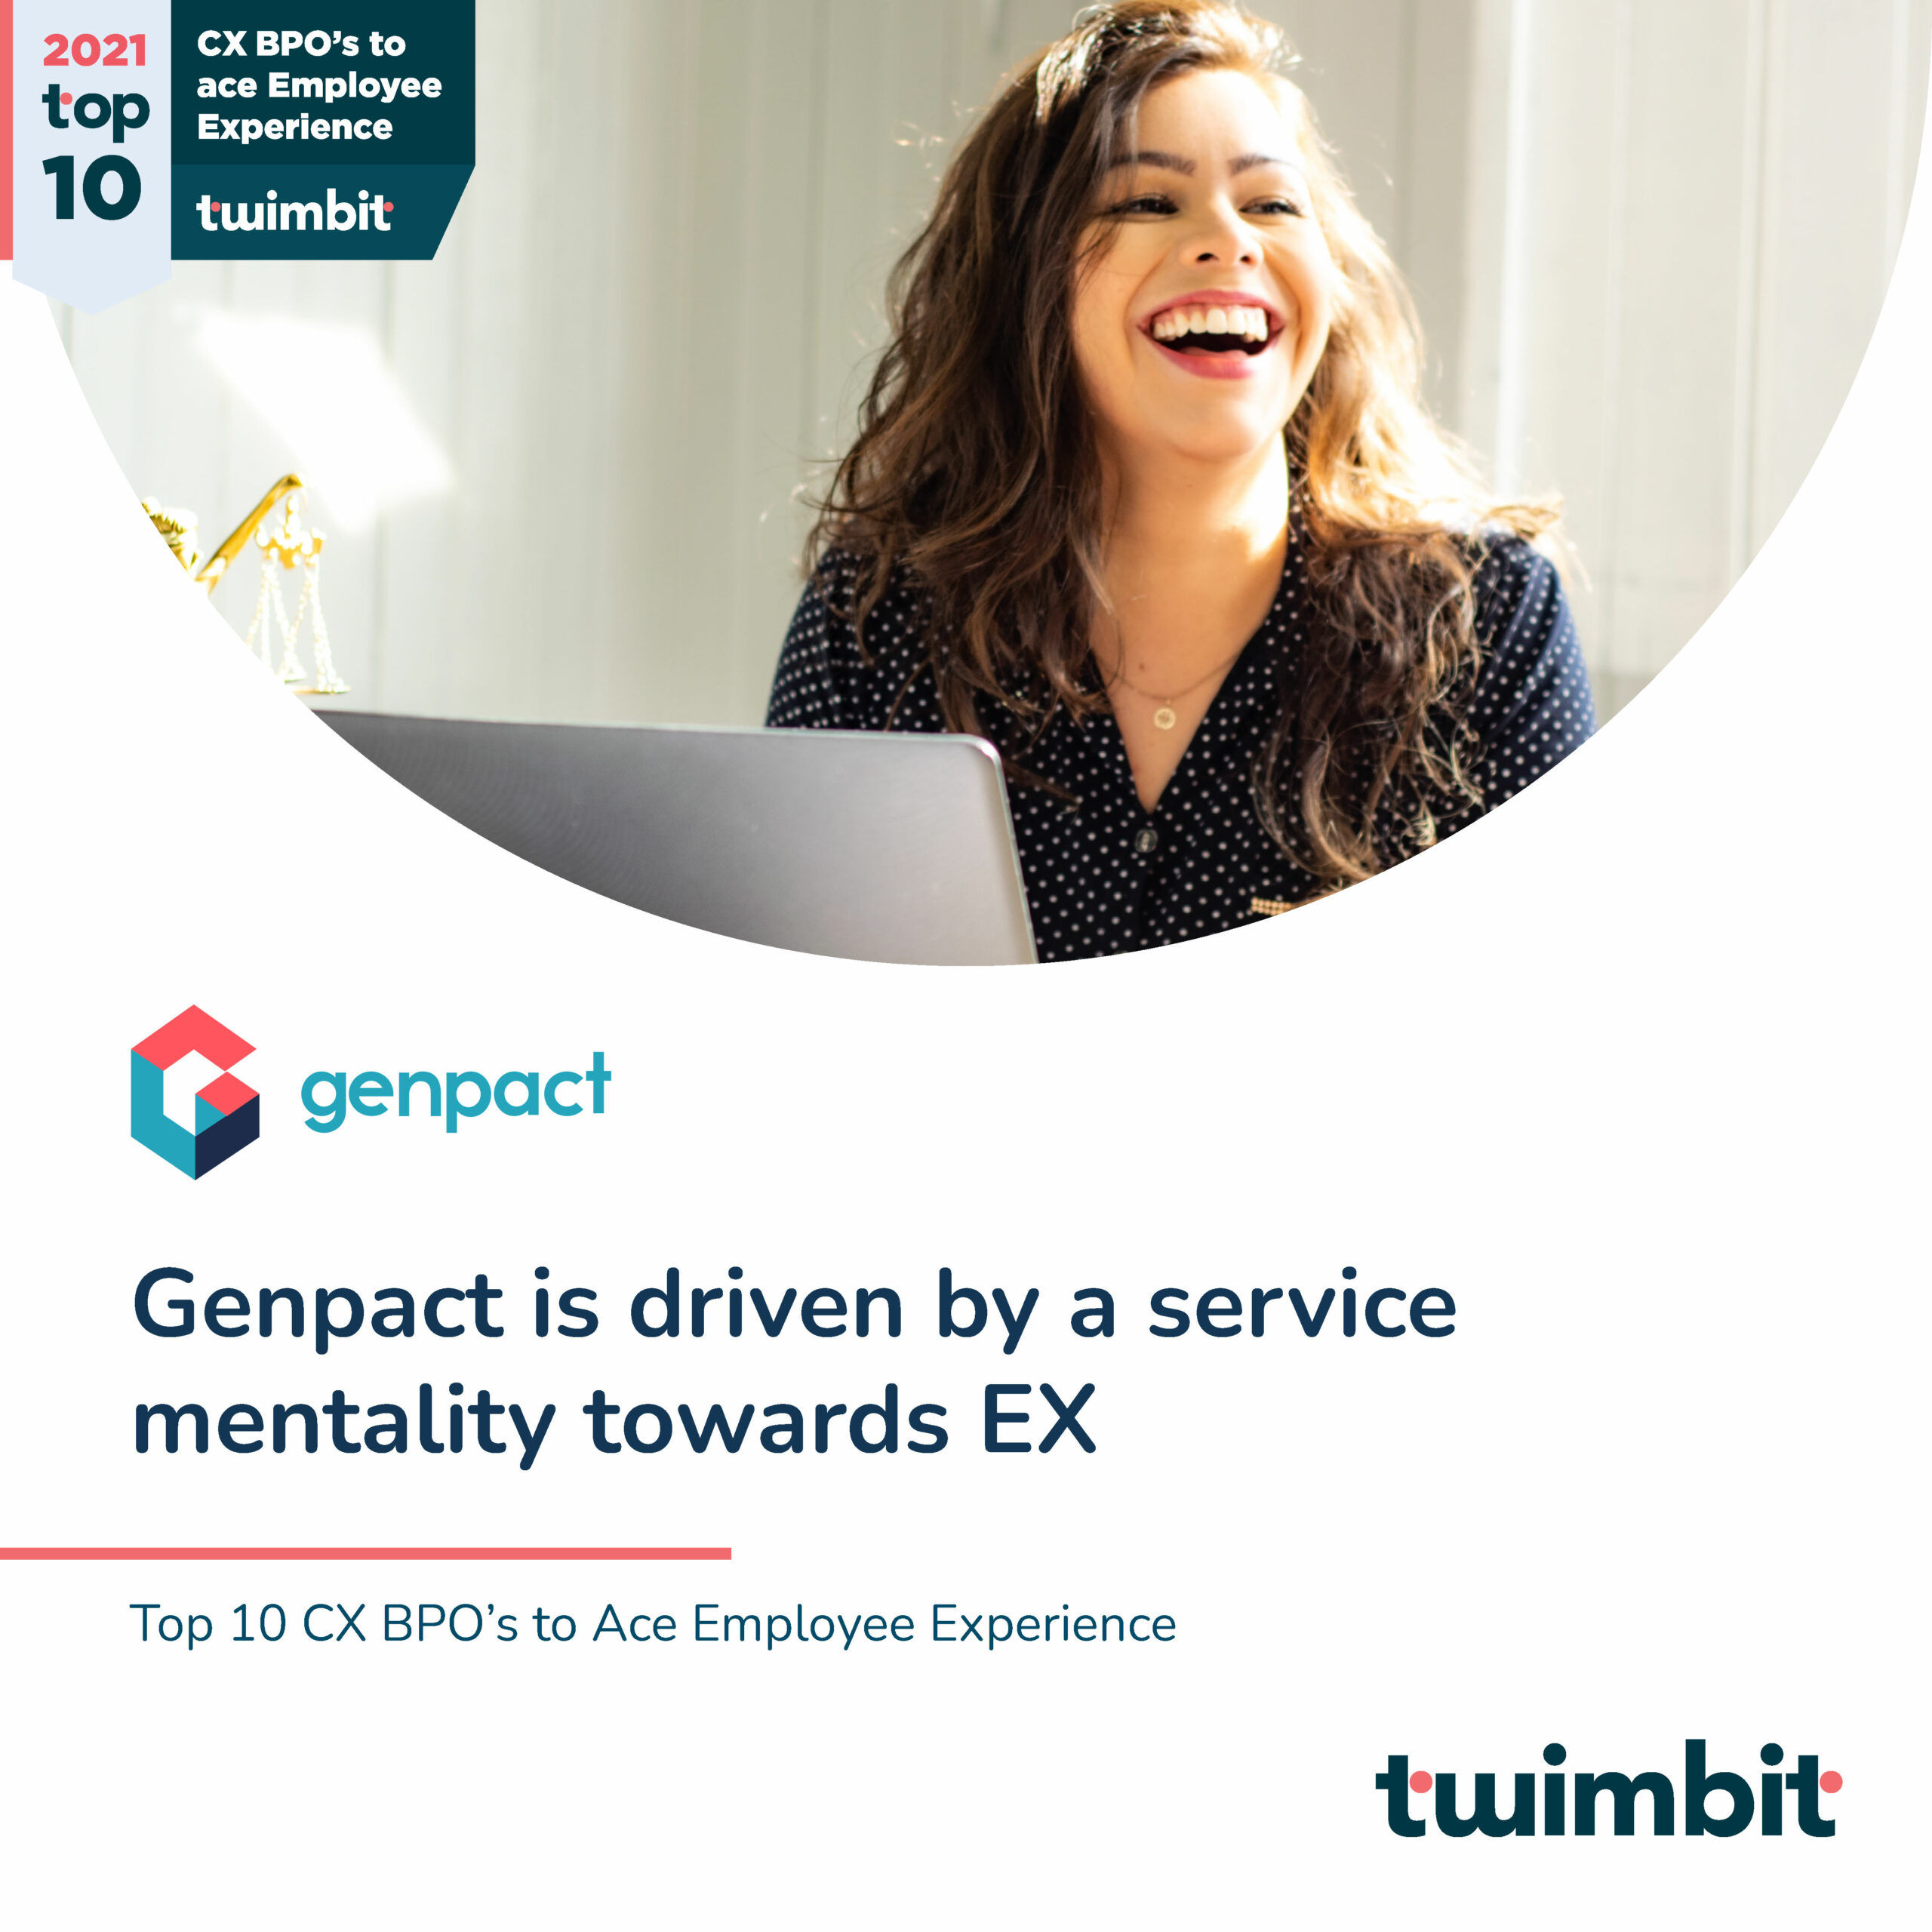 genpact-is-driven-by-a-service-mentality-towards-ex